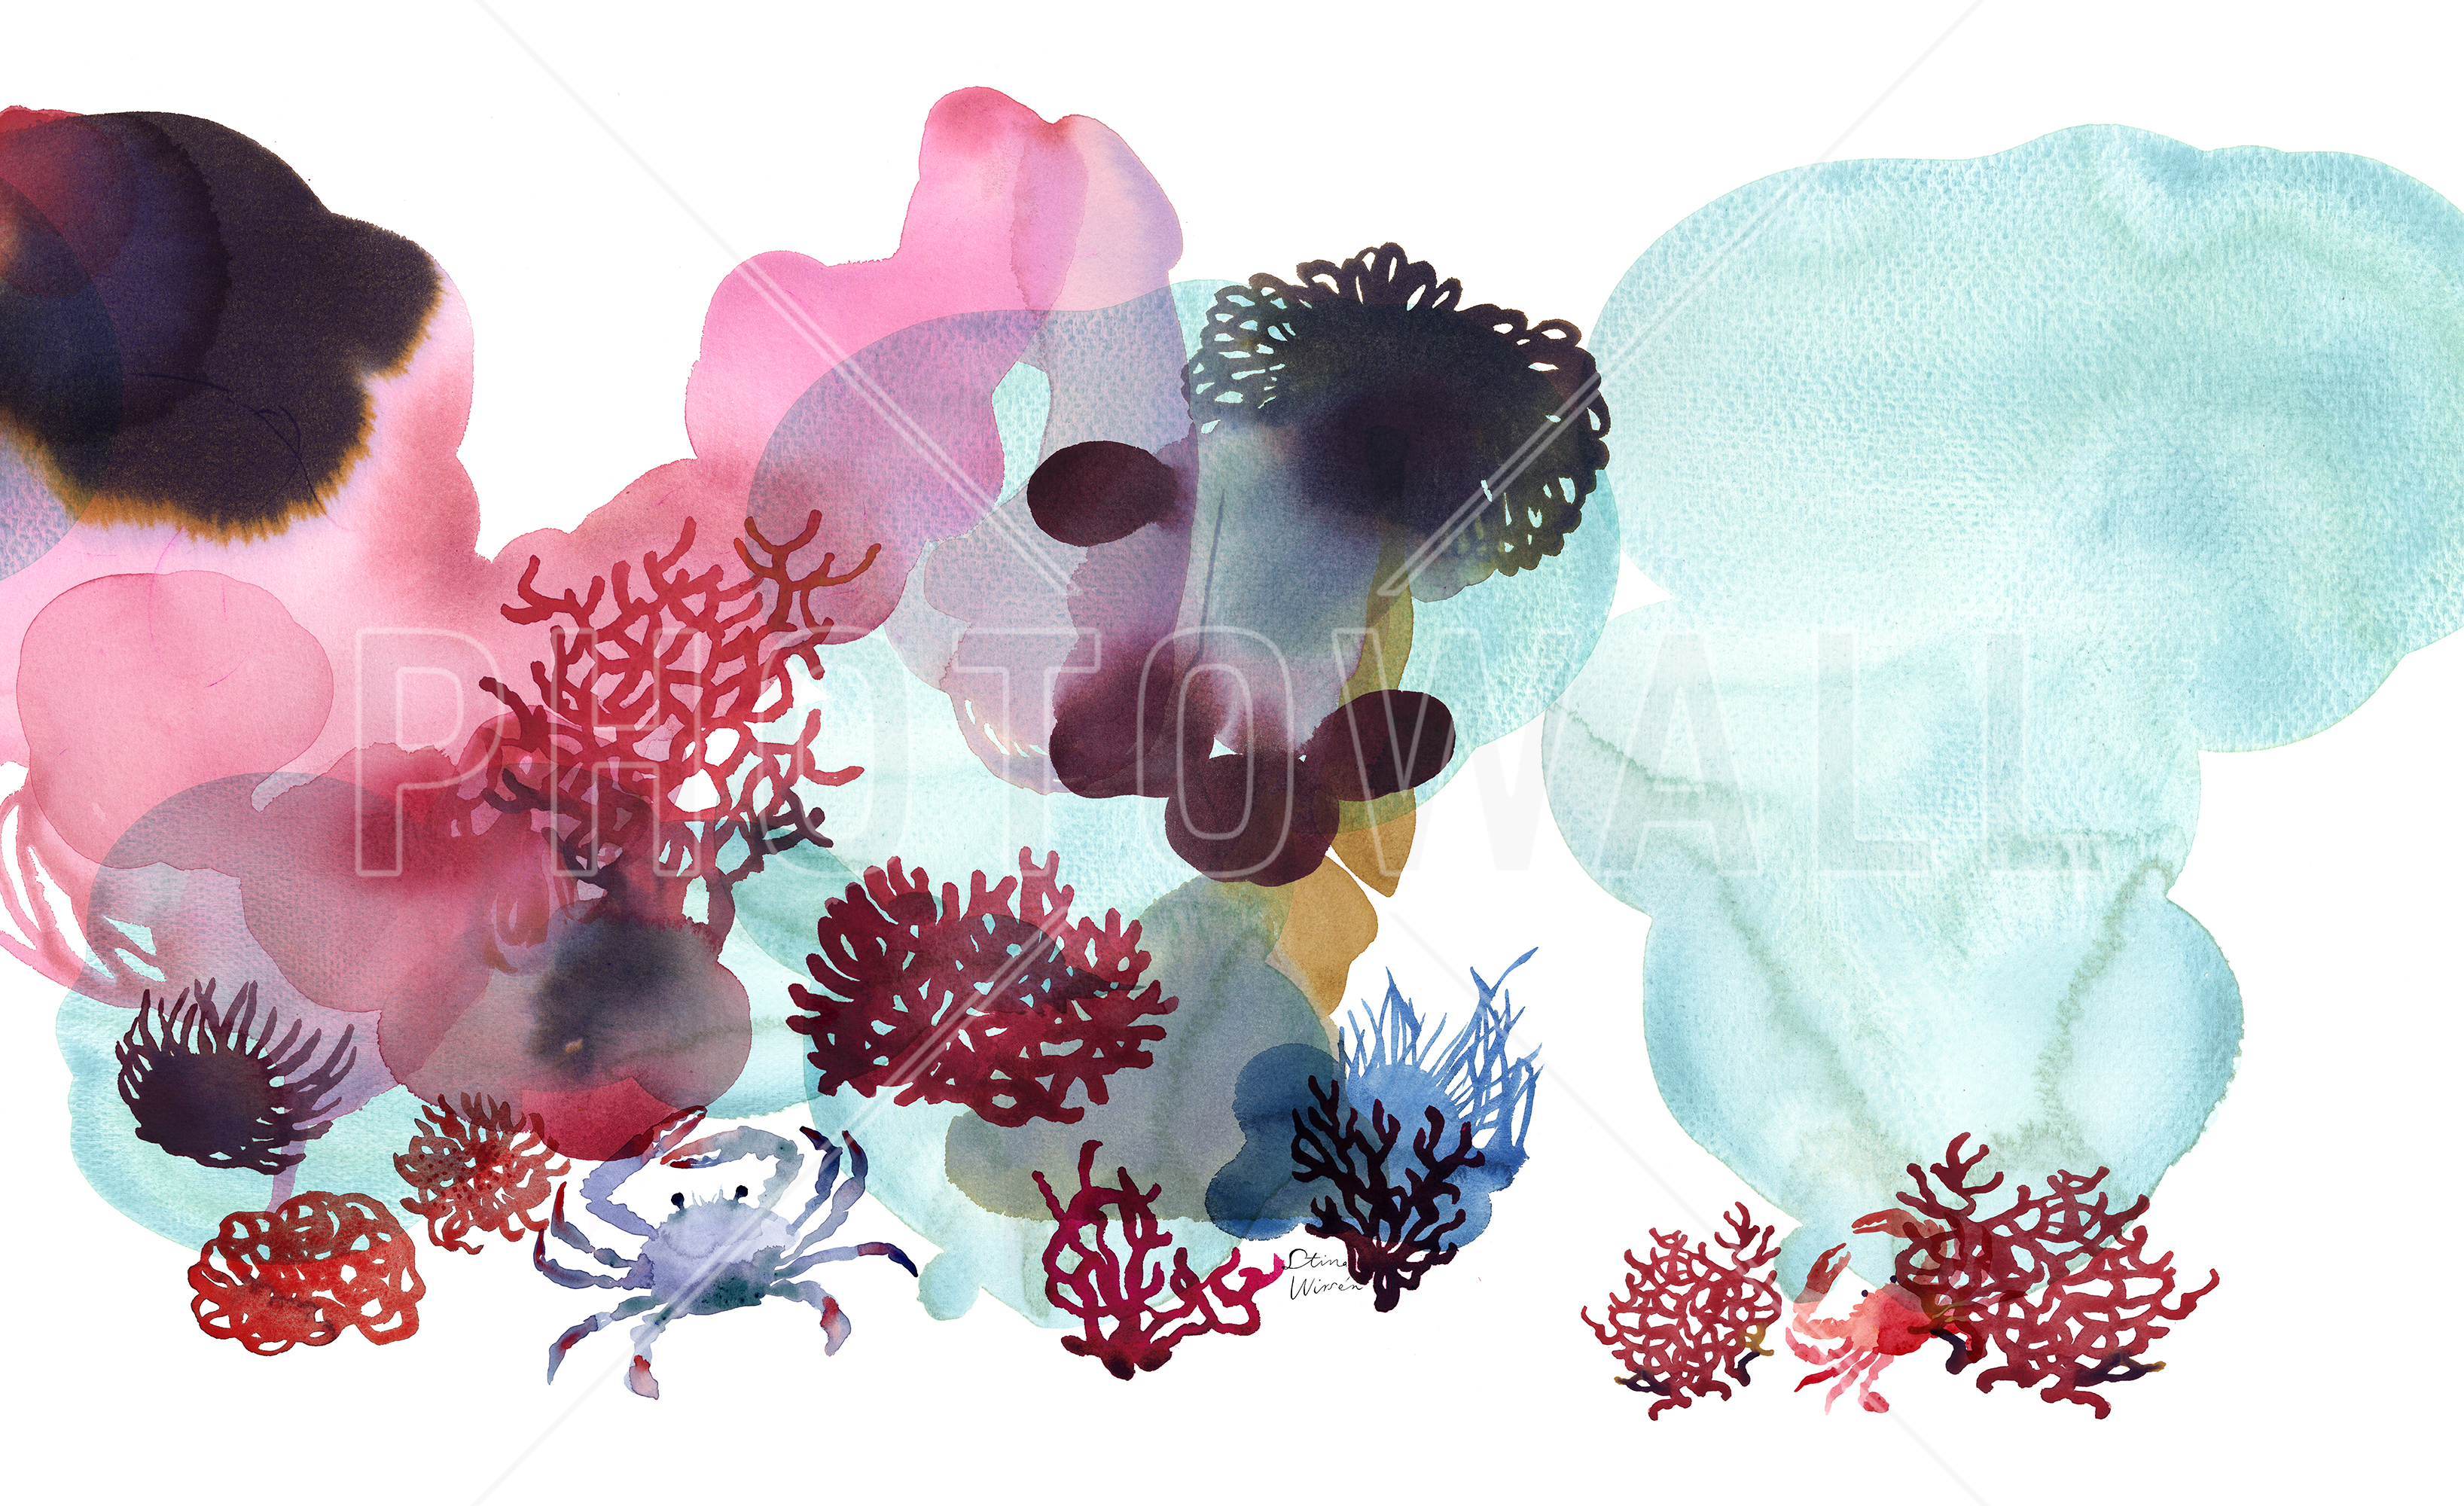 Water Color Coral Ii - Watercolor Painting - HD Wallpaper 